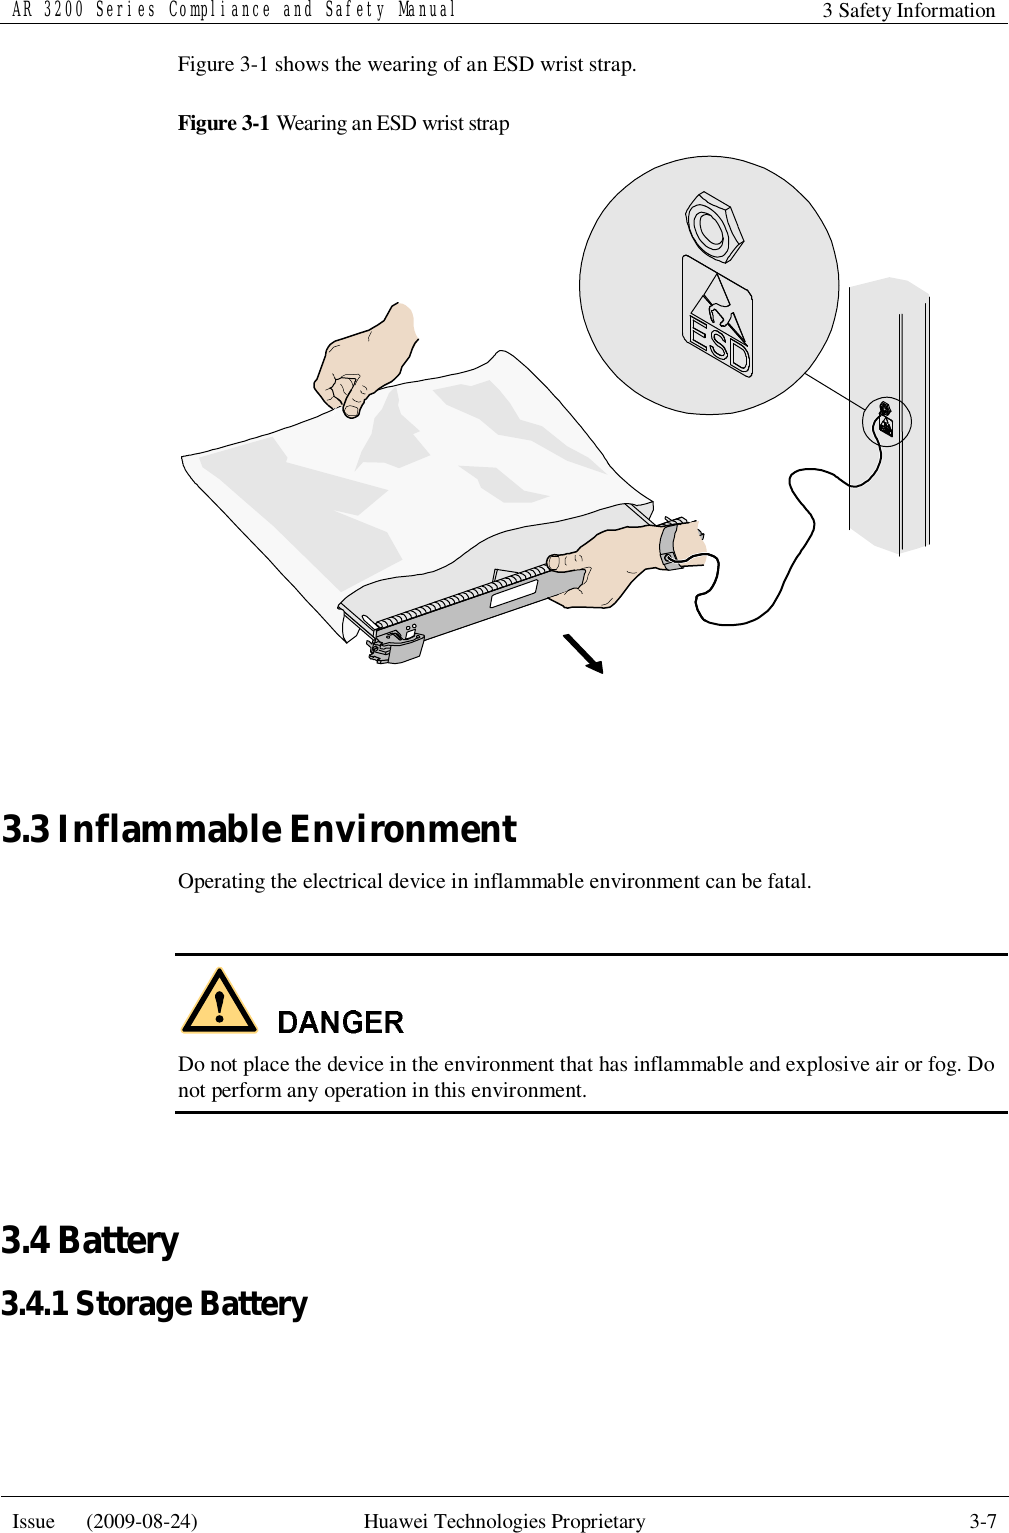 AR 3200 Series Compliance and Safety Manual 3 Safety Information  Issue   (2009-08-24)  Huawei Technologies Proprietary  3-7  Figure 3-1 shows the wearing of an ESD wrist strap. Figure 3-1 Wearing an ESD wrist strap   3.3 Inflammable Environment Operating the electrical device in inflammable environment can be fatal.   Do not place the device in the environment that has inflammable and explosive air or fog. Do not perform any operation in this environment.  3.4 Battery 3.4.1 Storage Battery  